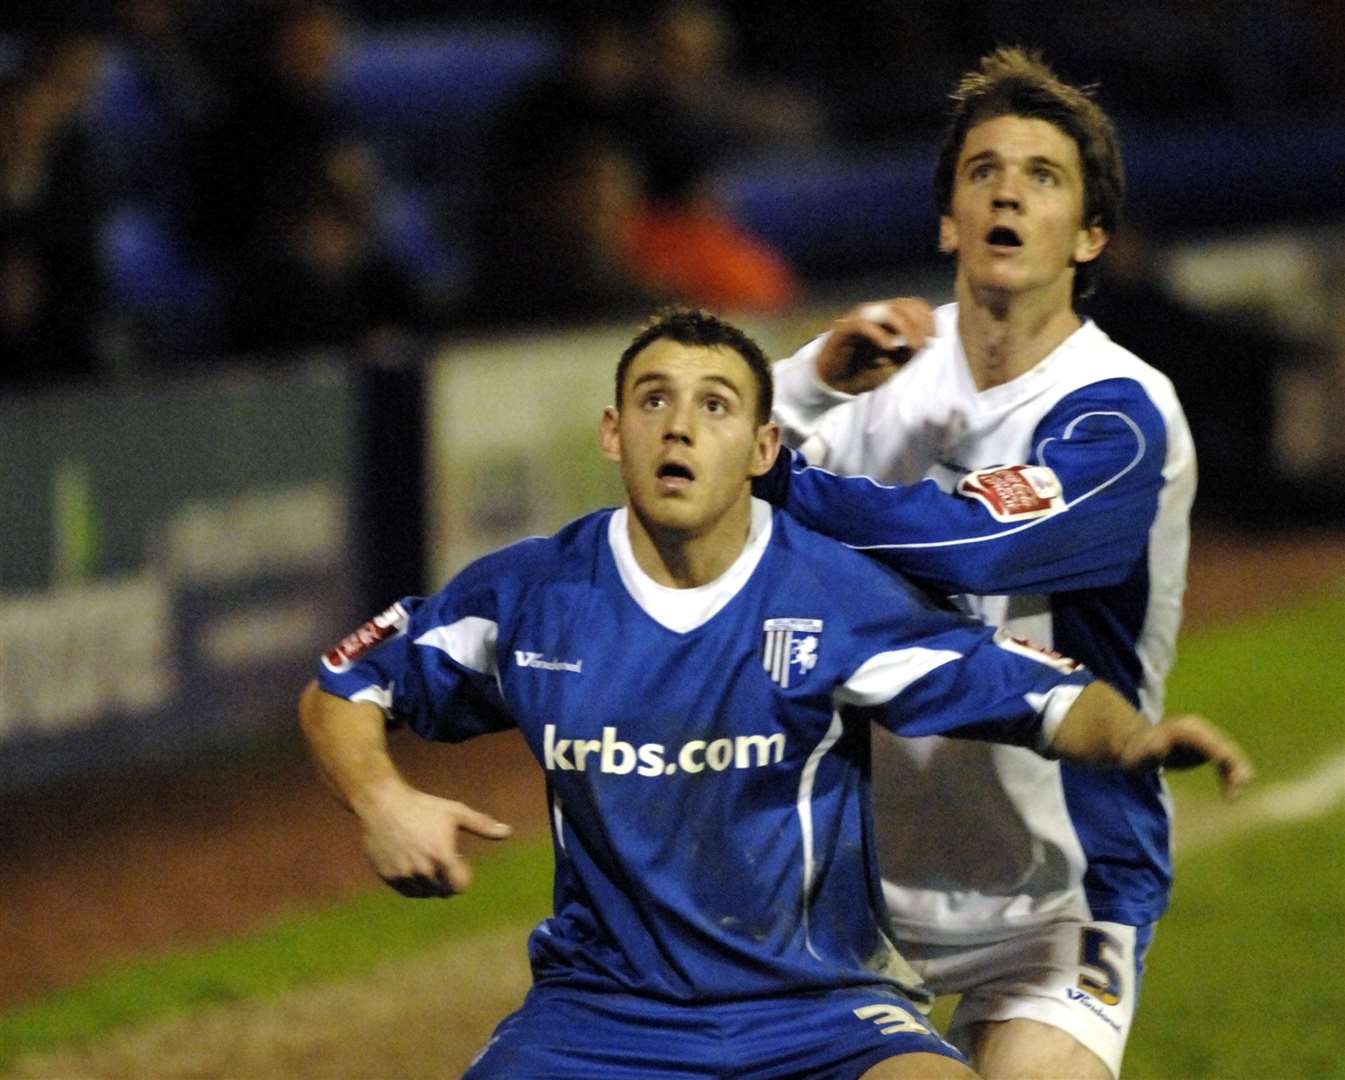 Barry Fuller made his debut for the Gills on January 29, 2008 in a match at Tranmere Picture: Matthew Walker